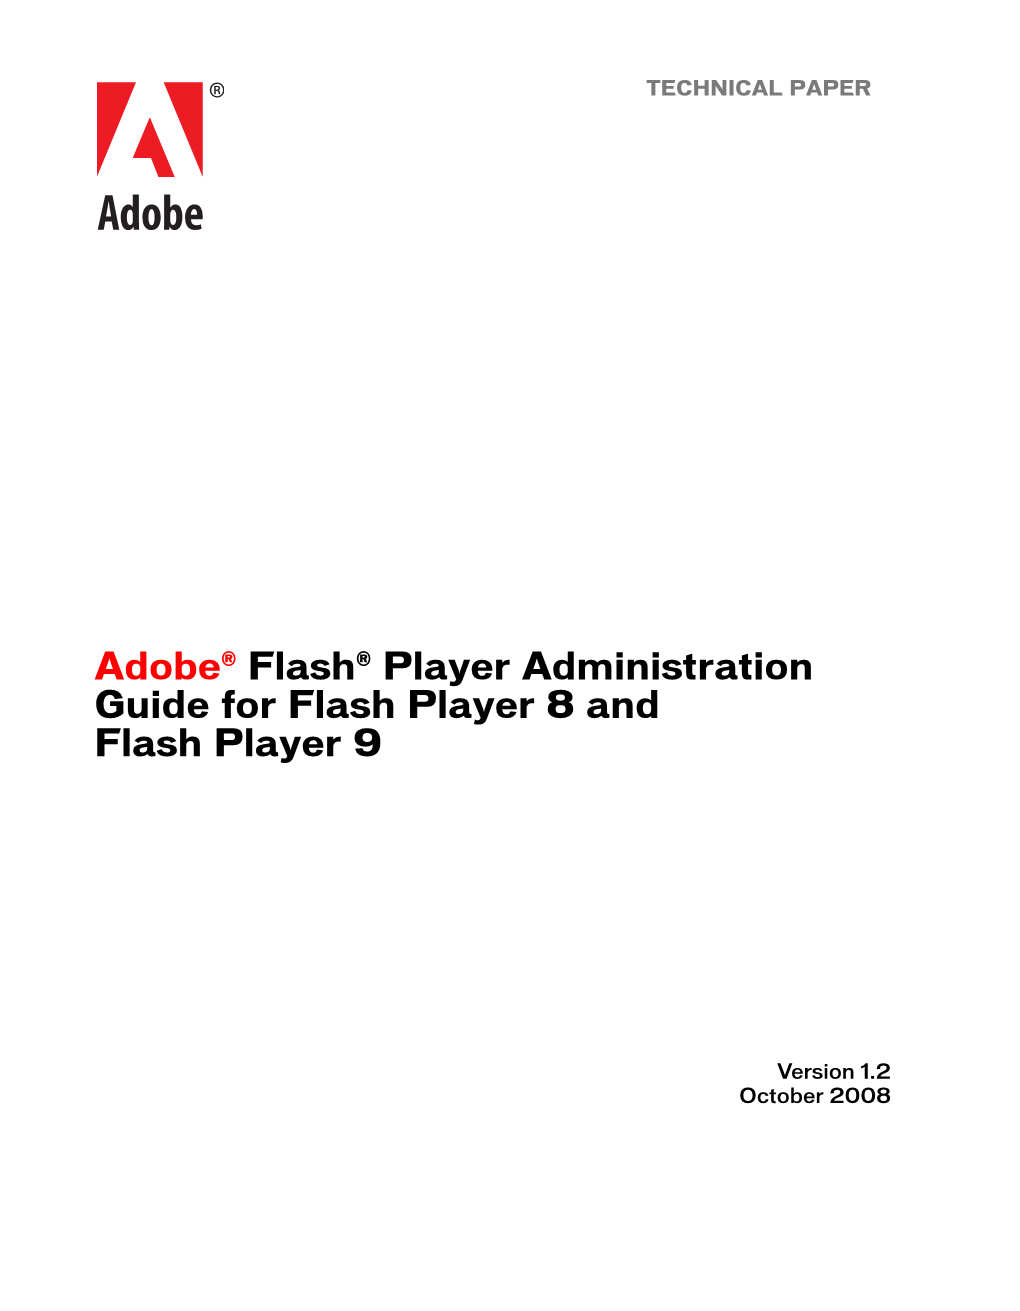 Adobe® Flash® Player Administration Guide for Flash Player 8 and Flash Player 9